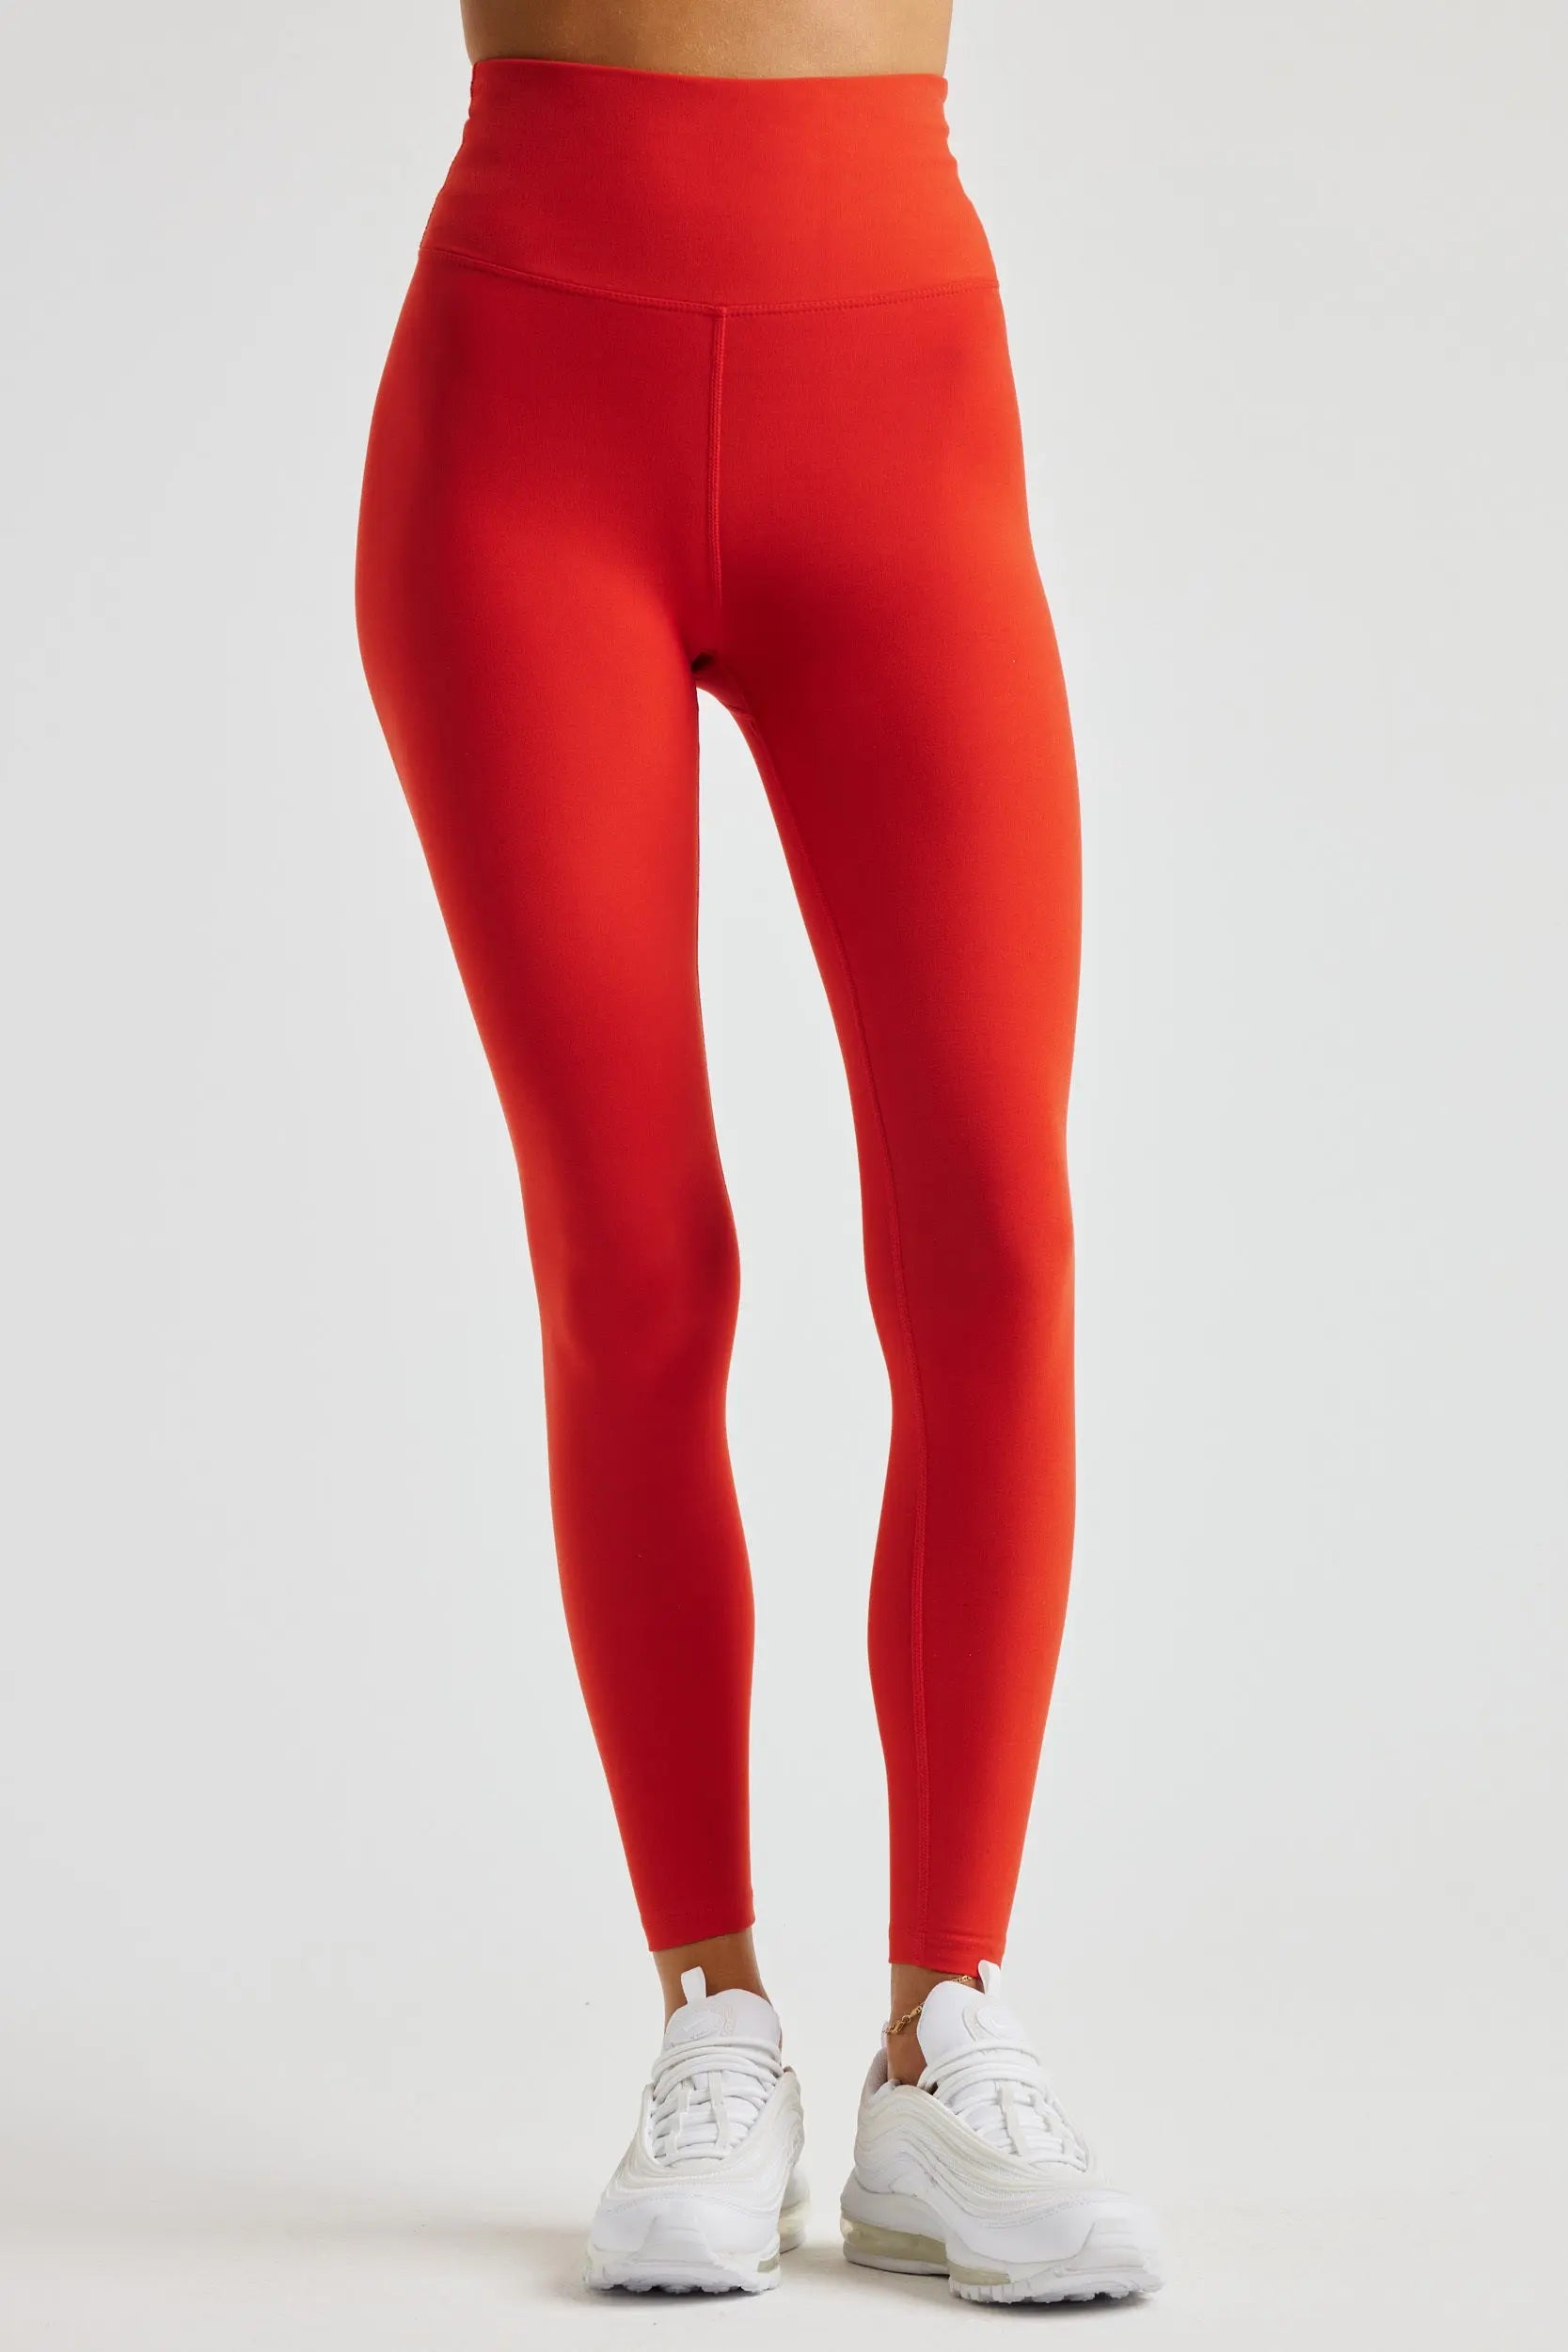 Year Of Ours High Rise Stretch Legging  Urban Outfitters Mexico -  Clothing, Music, Home & Accessories